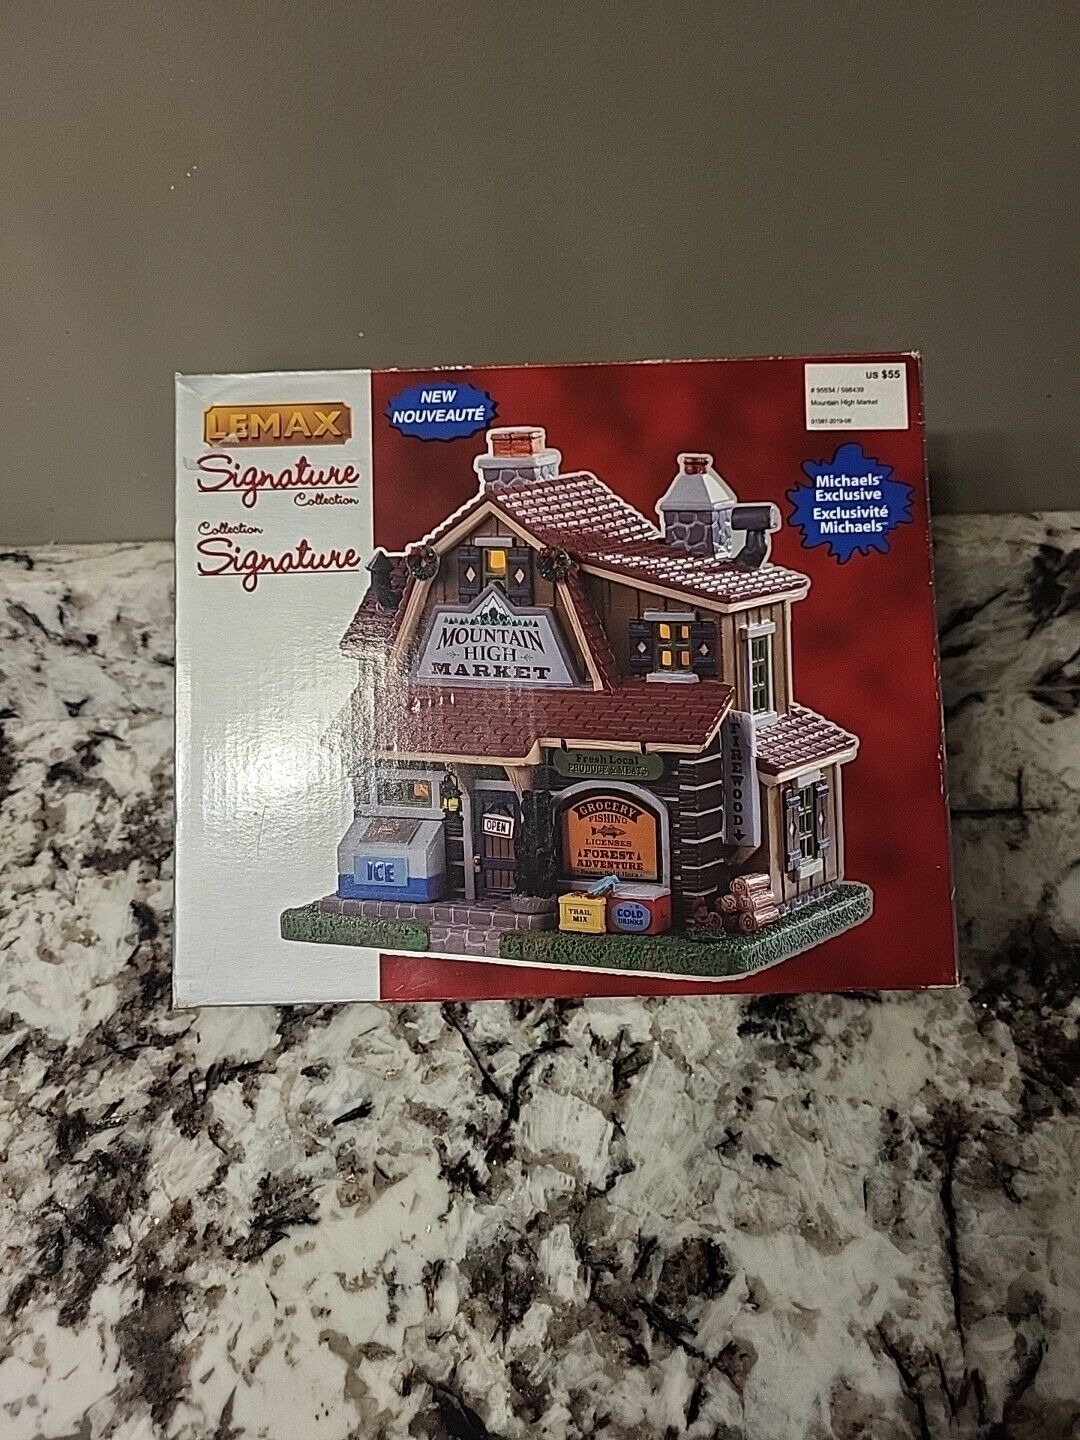 New In Box Lemax Mountain High Market Building 95534 Signature Collection 2019 